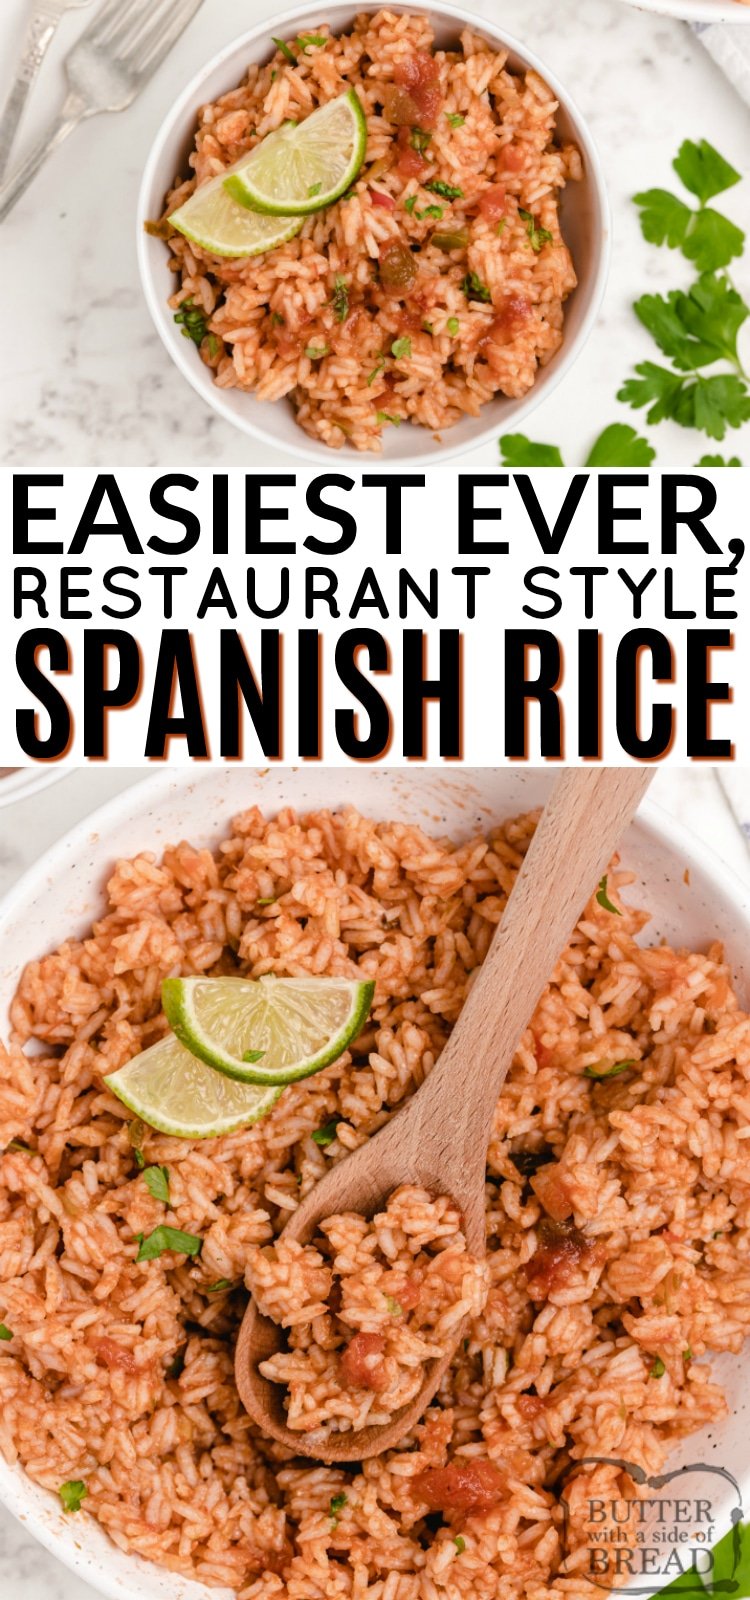 Easy Spanish Rice made on the stove with only a few simple ingredients. Tastes just like Spanish rice from your favorite Mexican restaurant! Using salsa in the recipe makes this recipe one of the easiest Mexican rice recipes ever! 